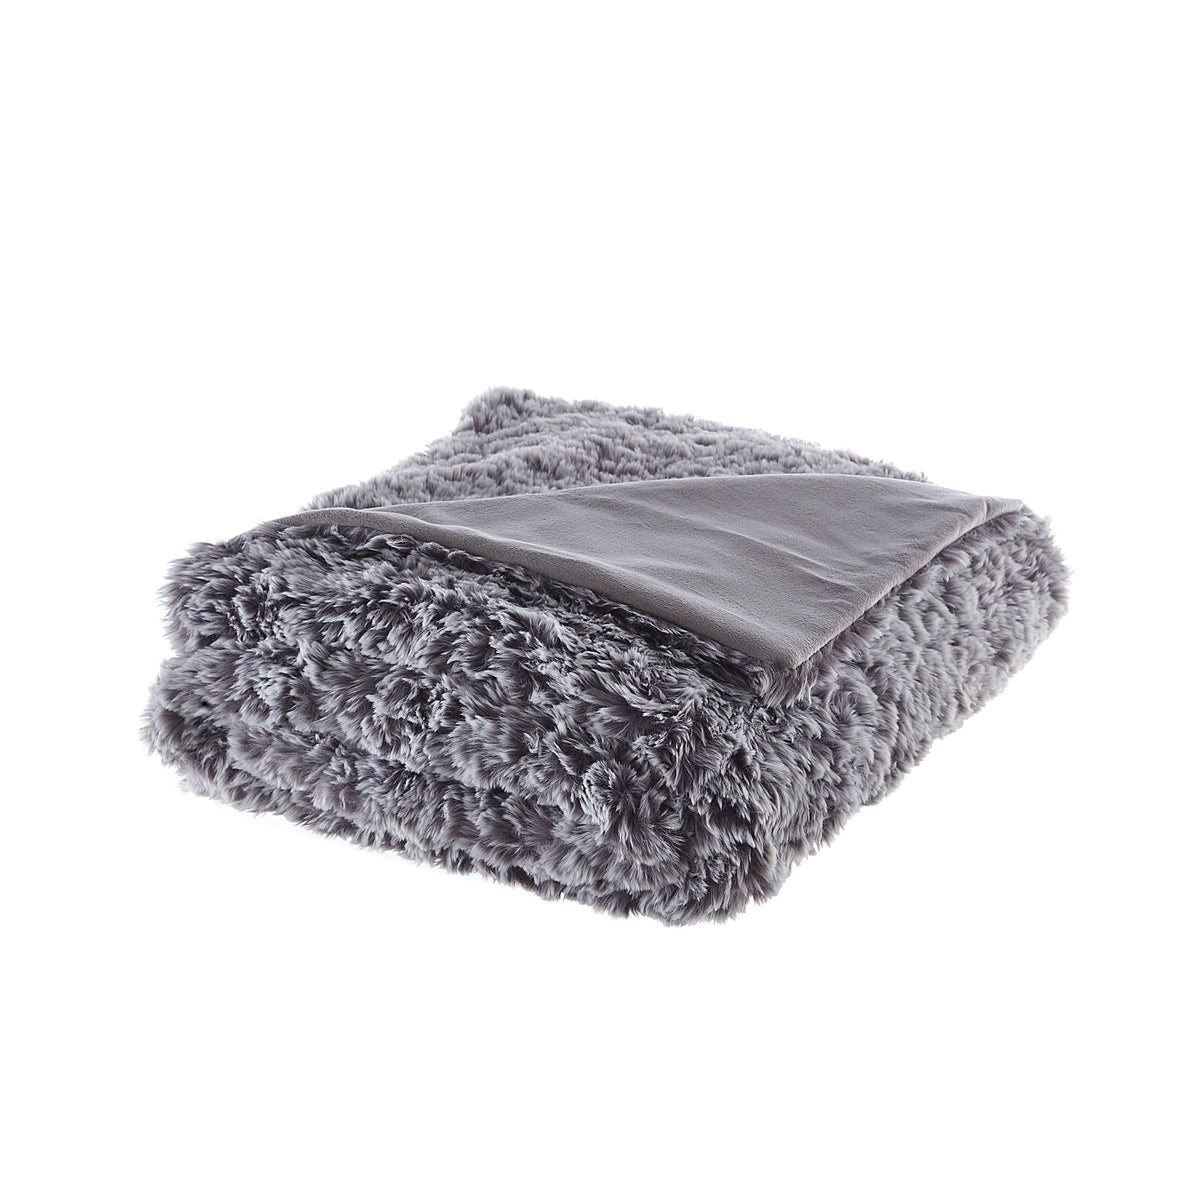 60" X 50" Black Knitted Polyester Plush Throw Blanket